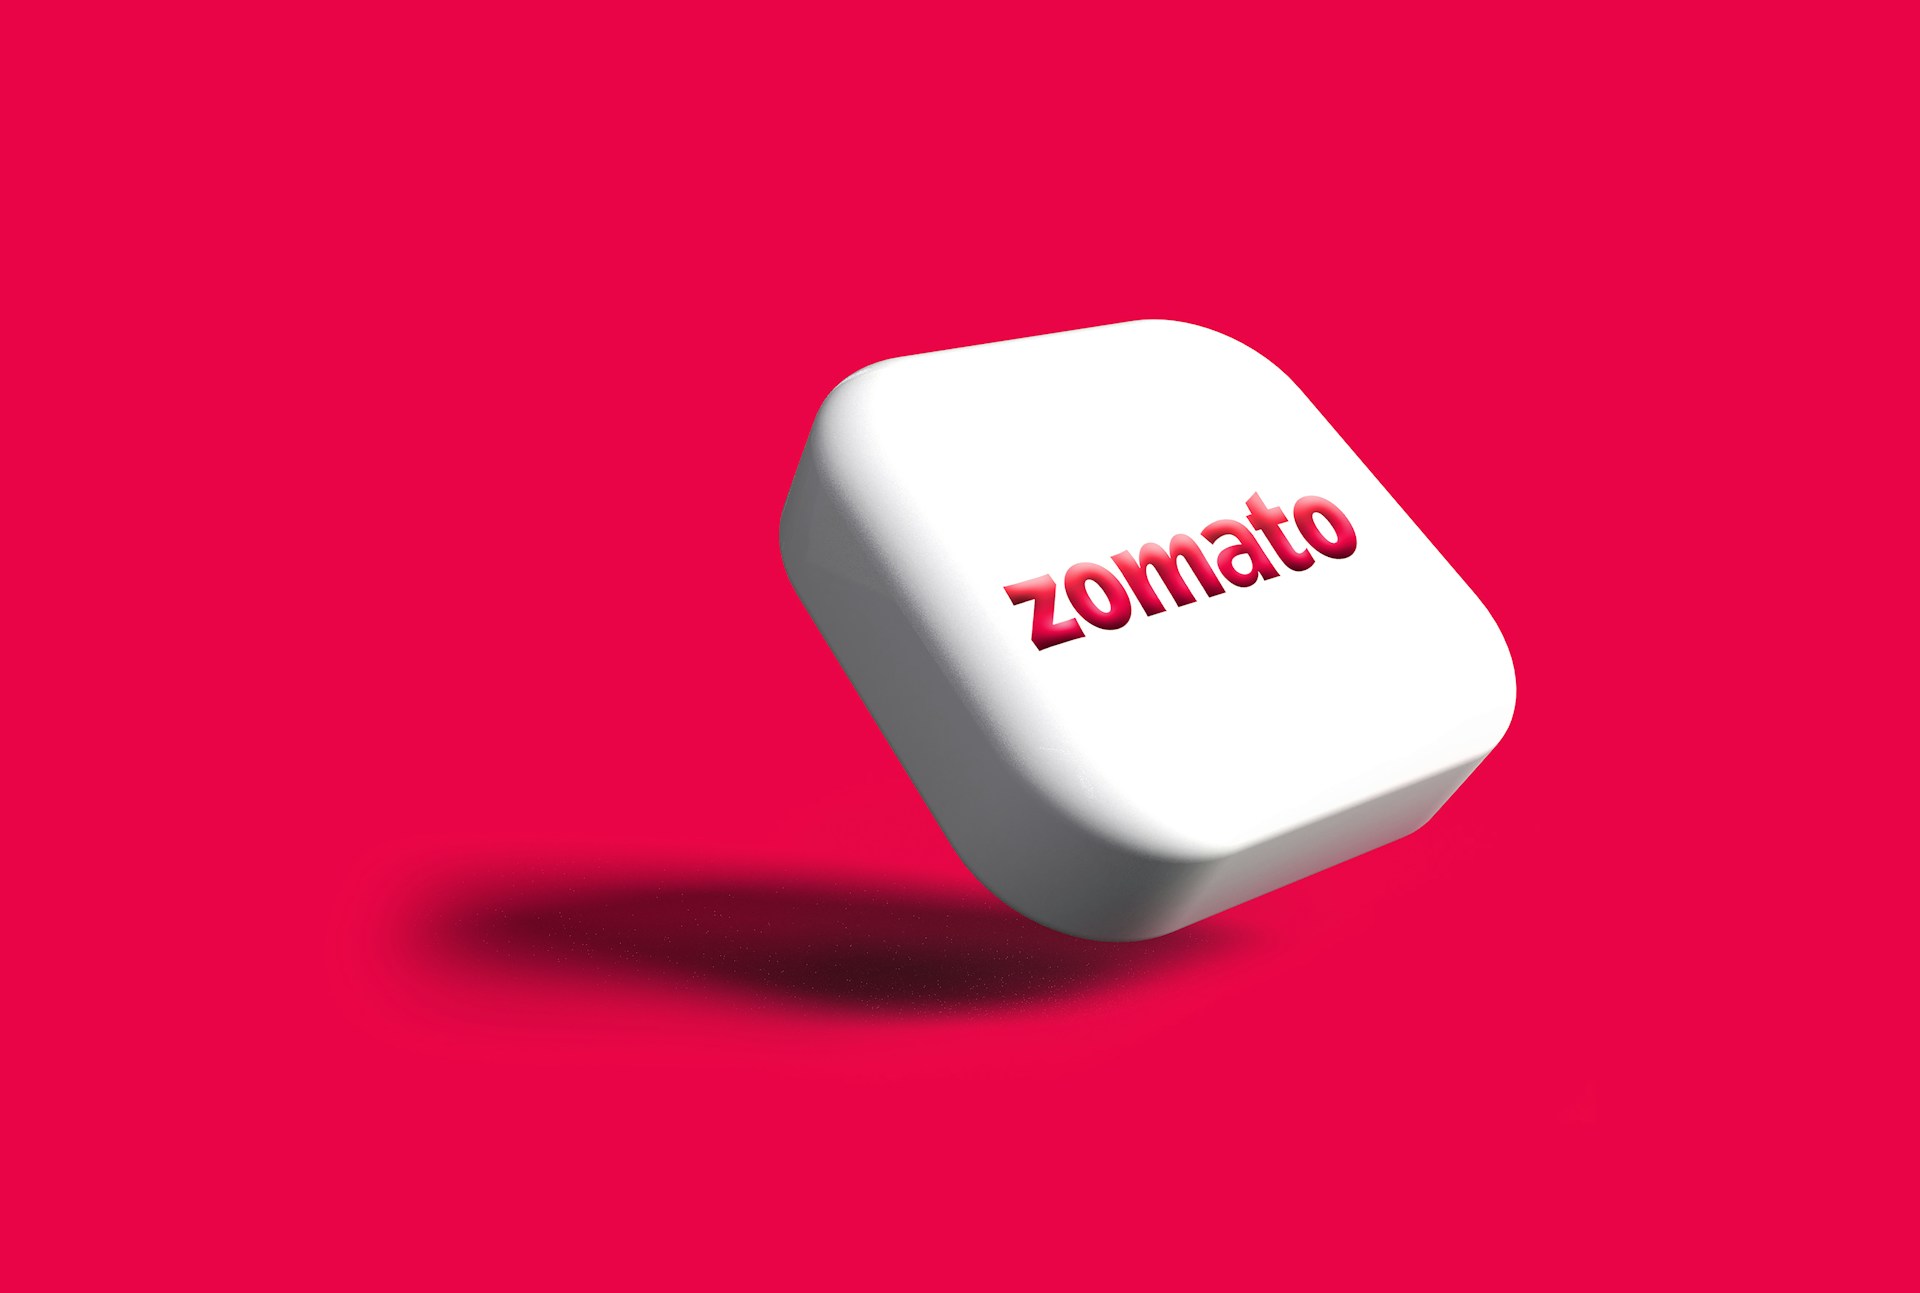 Zomato Share Price Soars to New Heights